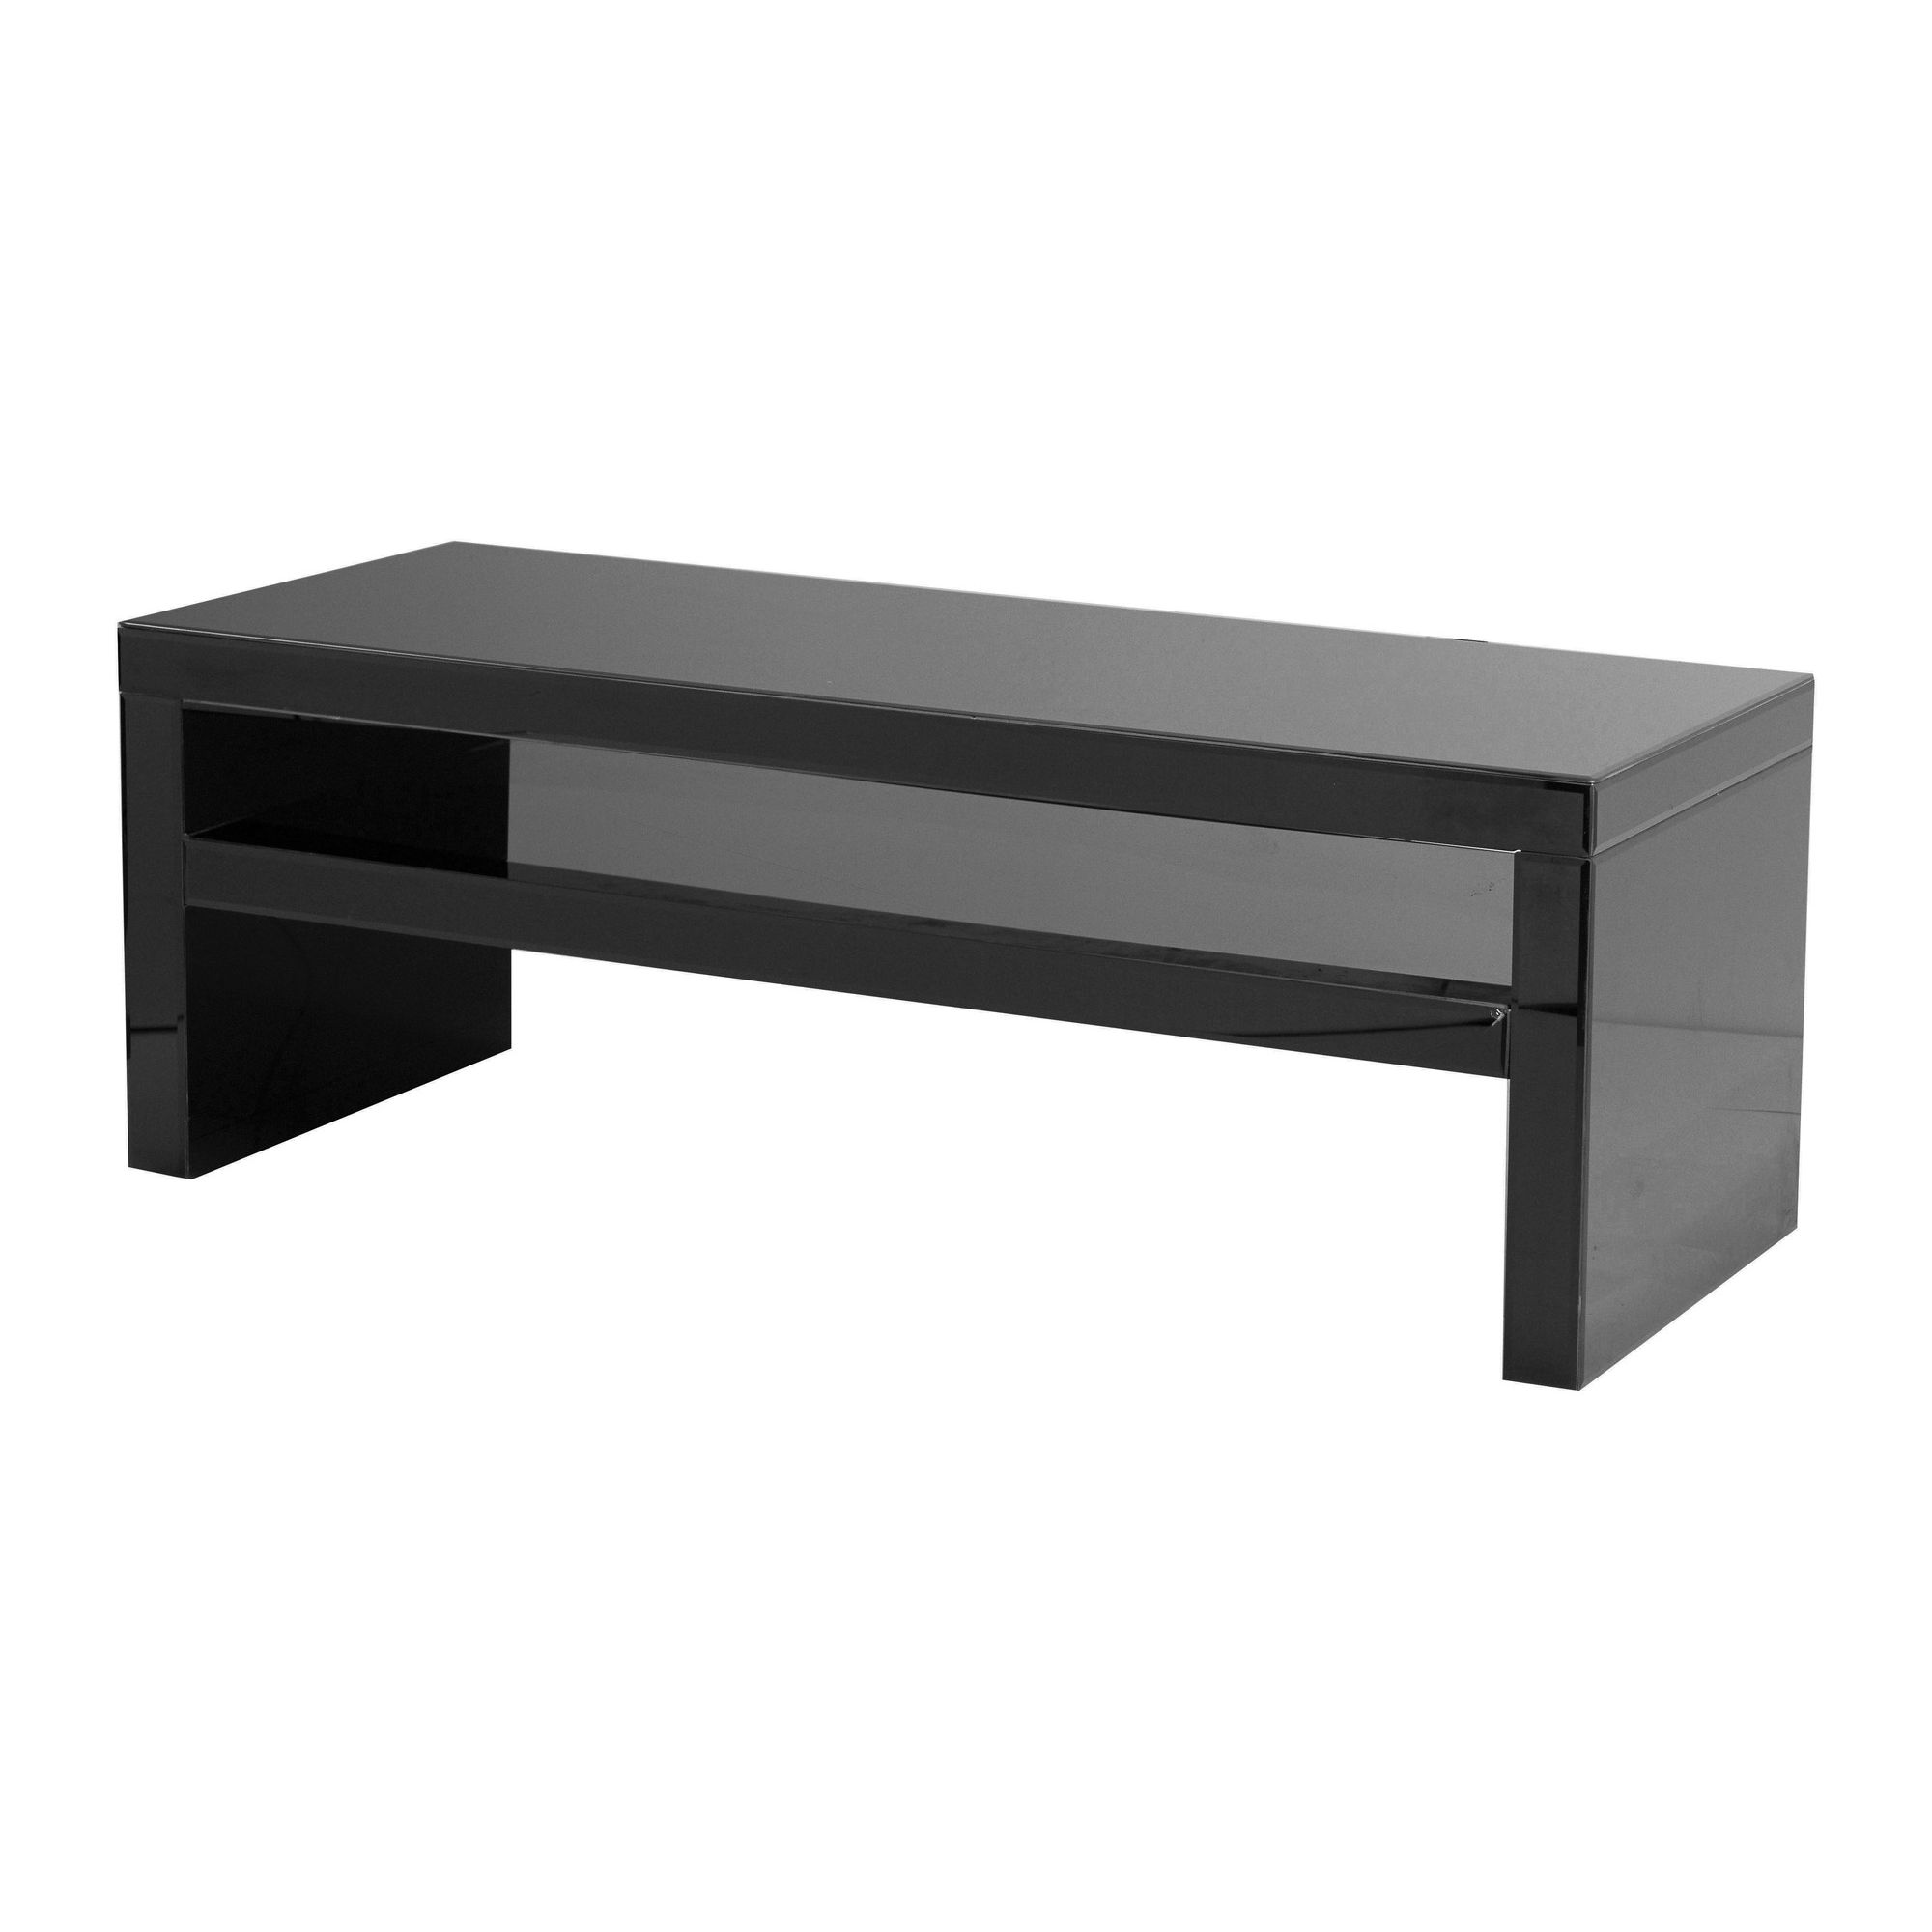 Premier Housewares Coffee Table with Shelf at Tesco Direct